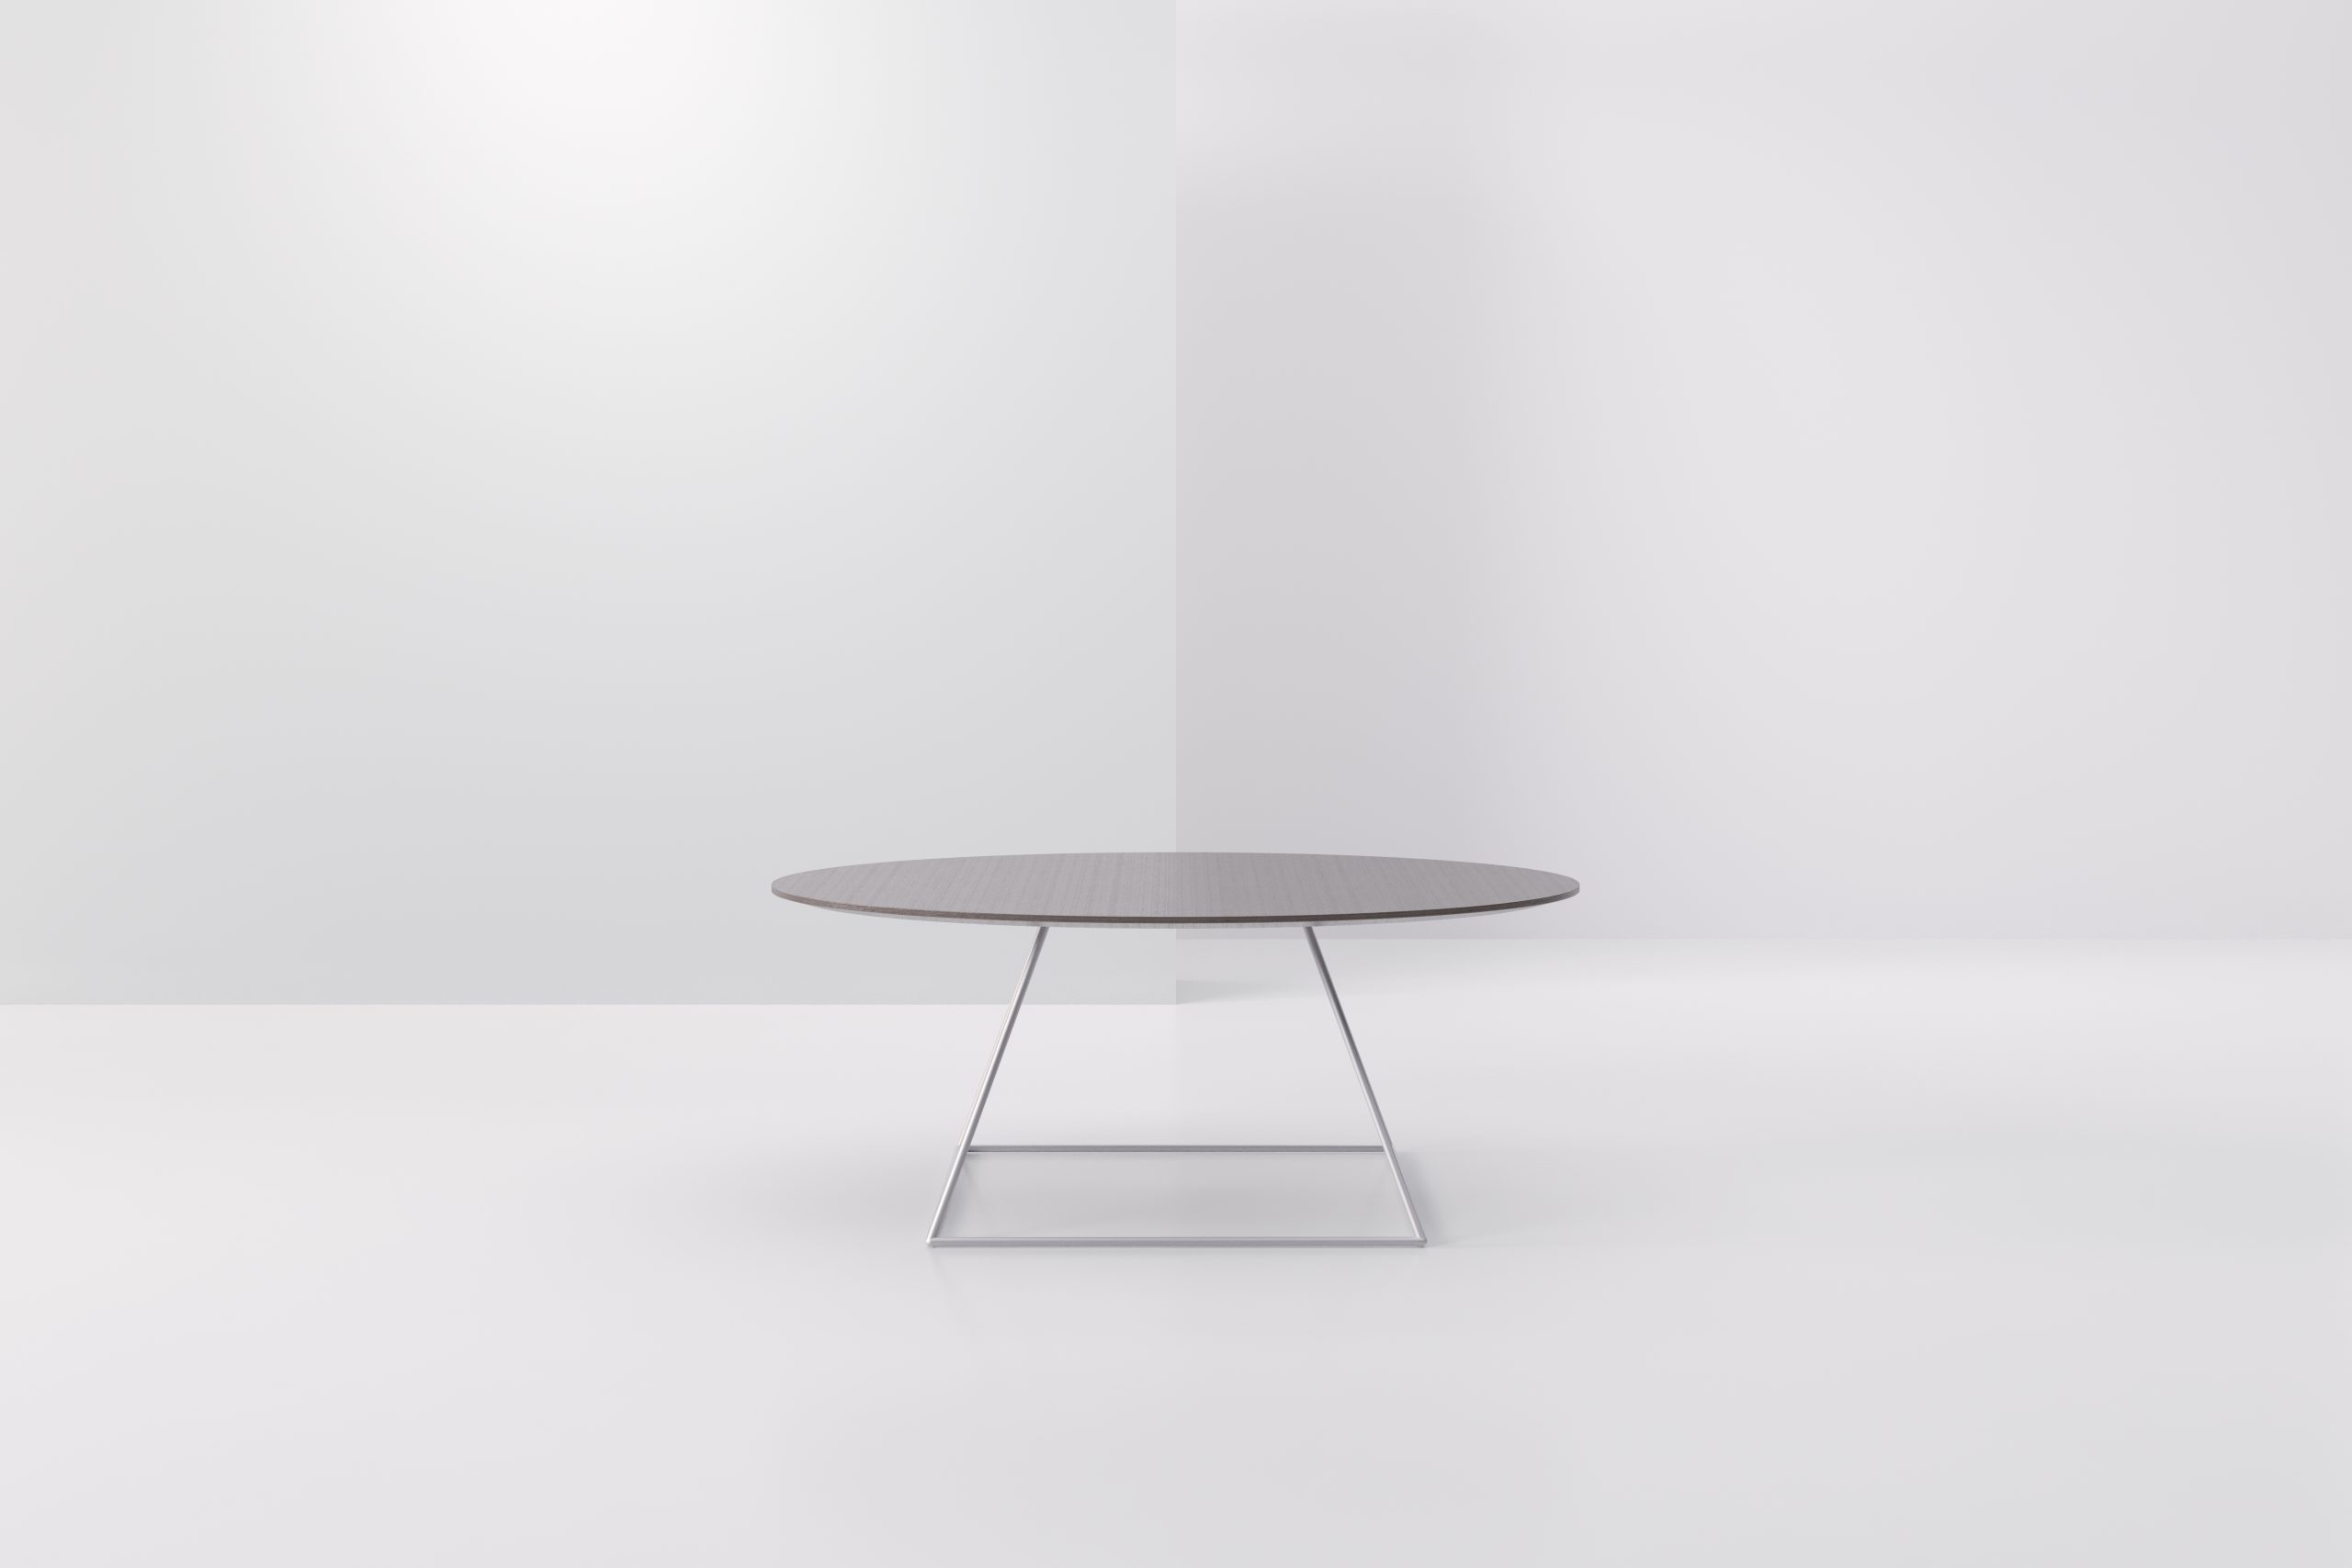 Dayton Large Oval Cocktail Table Product Image 3